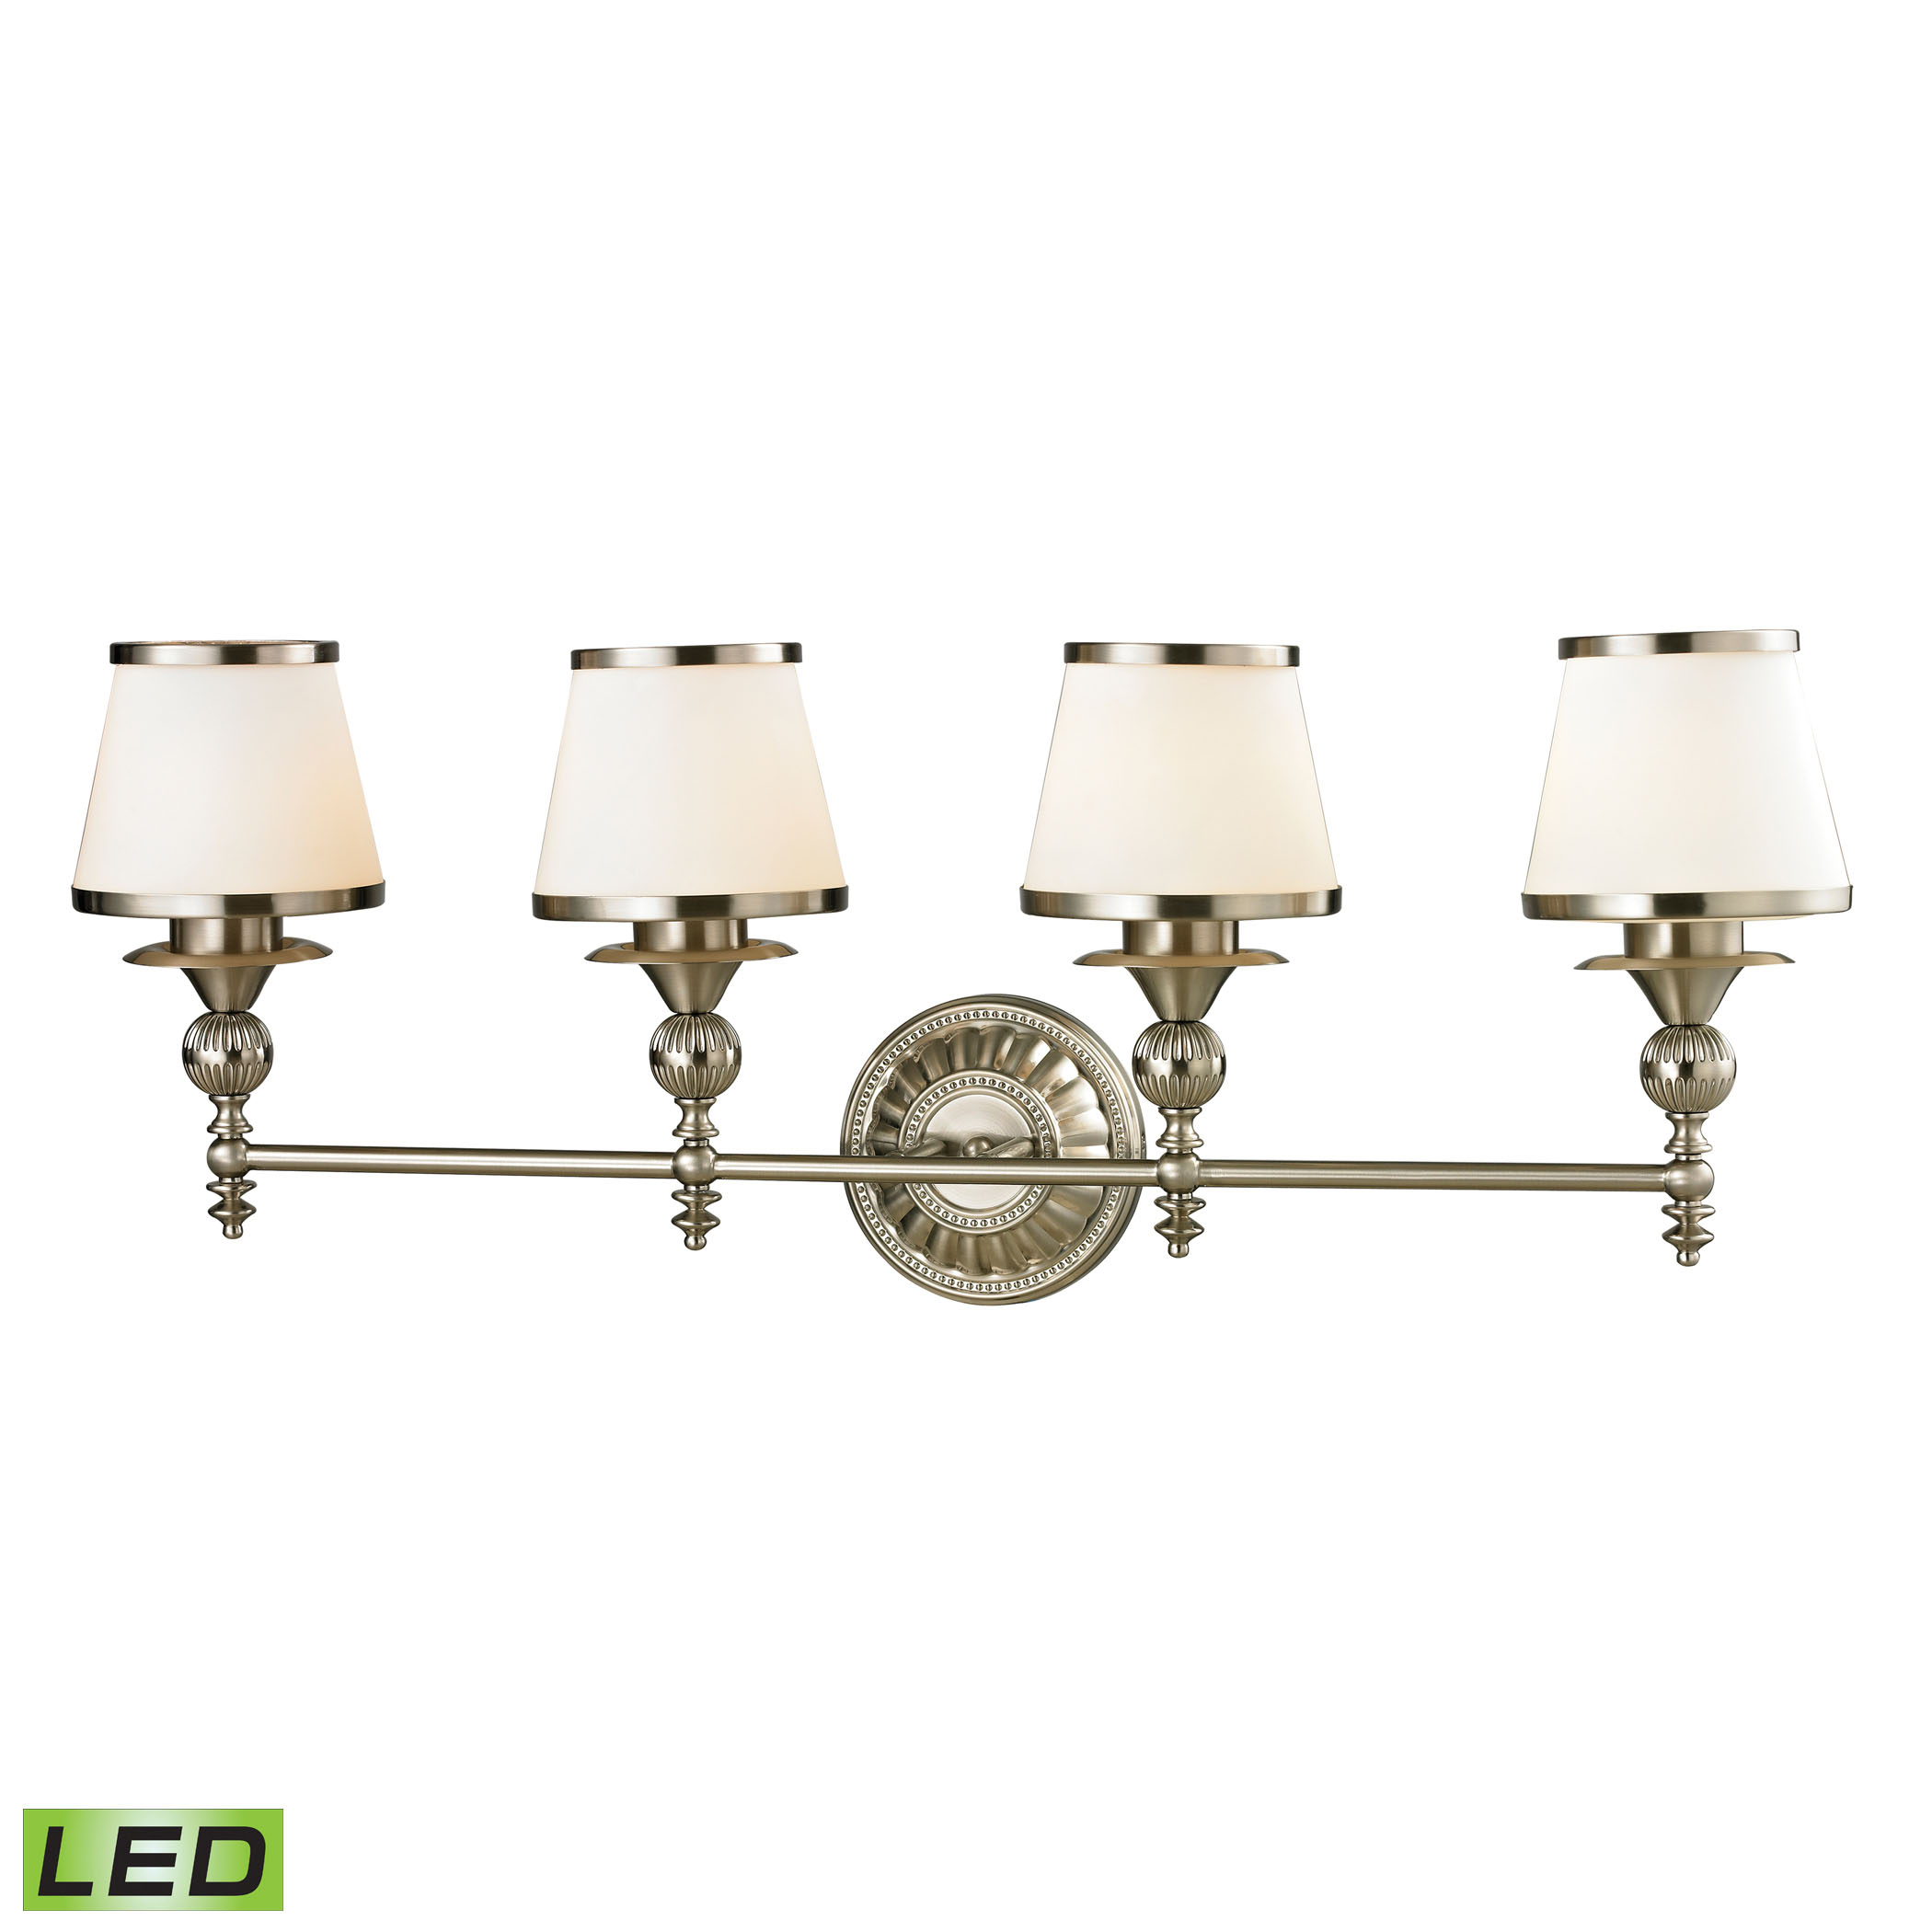 Smithfield Collection 4 Light Bath in Brushed Nickel - LED, 800 Lumens (3200 Lumens Total) with Full